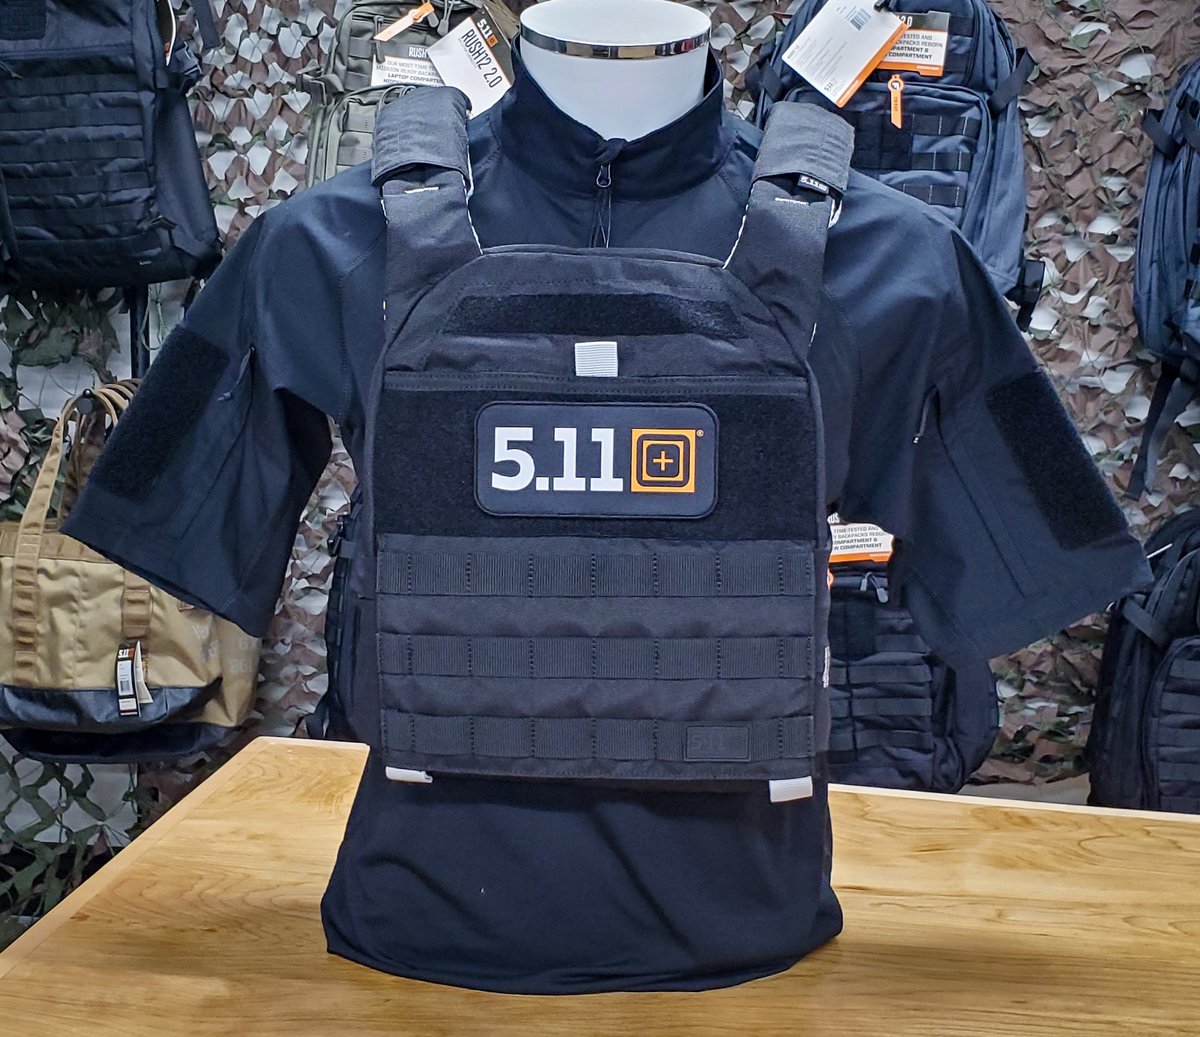 Unleash your inner savage with the TacTec Trainer Weight Vest that is designed specifically for training! #GearUp #BePrepared #ServingThoseWhoServe #511Canada